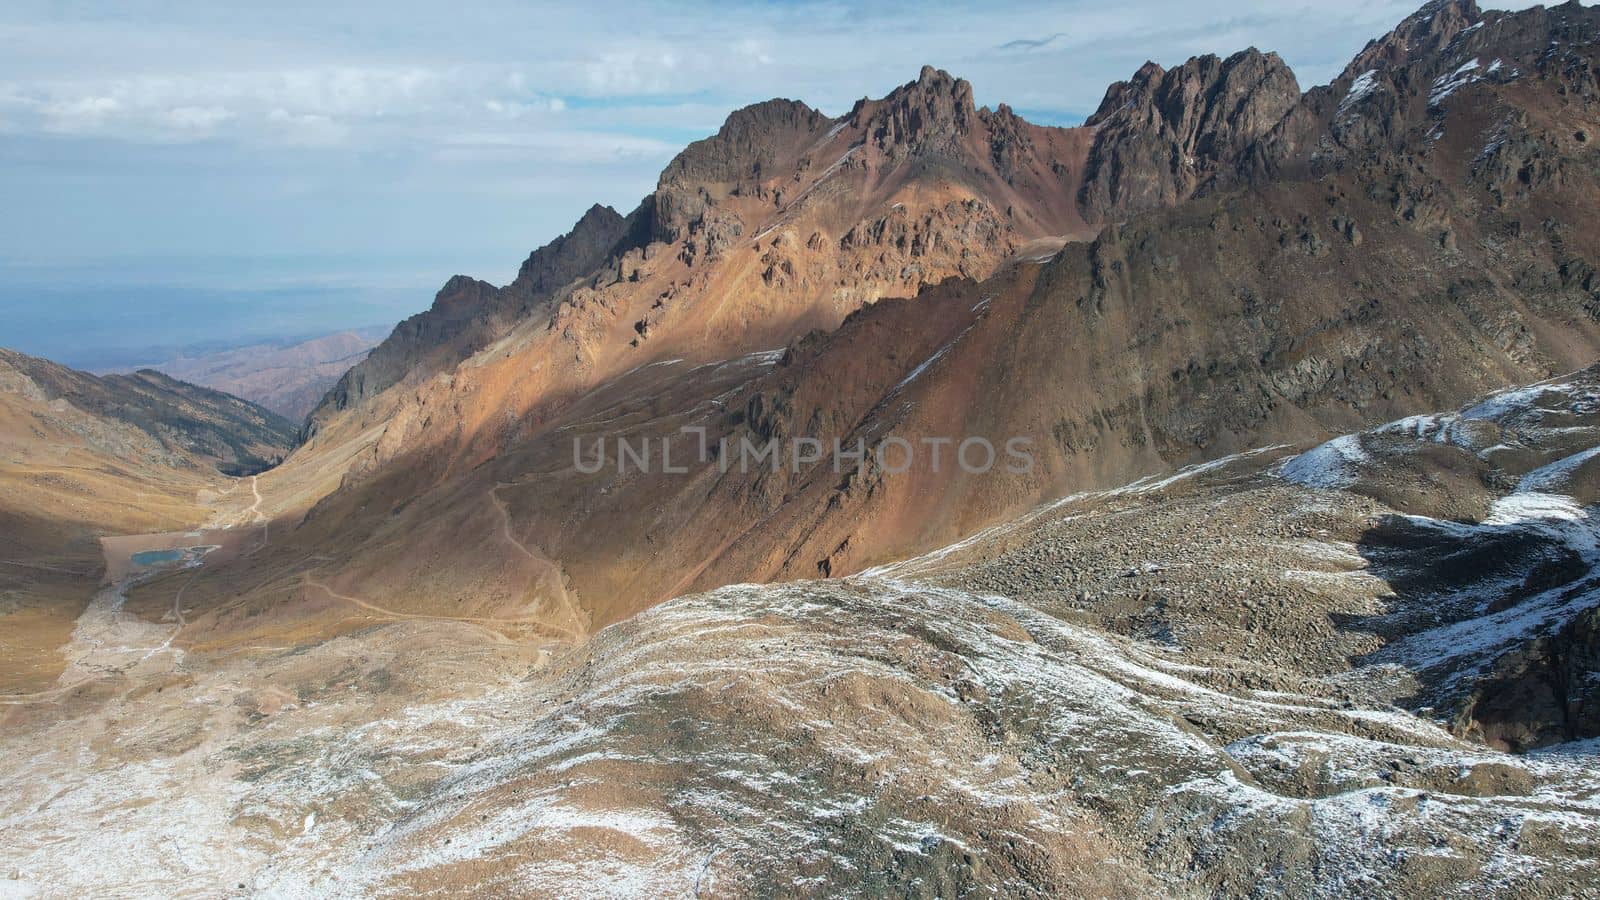 Top view of the high rocky mountains with trails. In places there is snow and yellow-orange plants grow. Shadows from clouds float on the rocks. A place to climb to the top. The mountains of Almaty